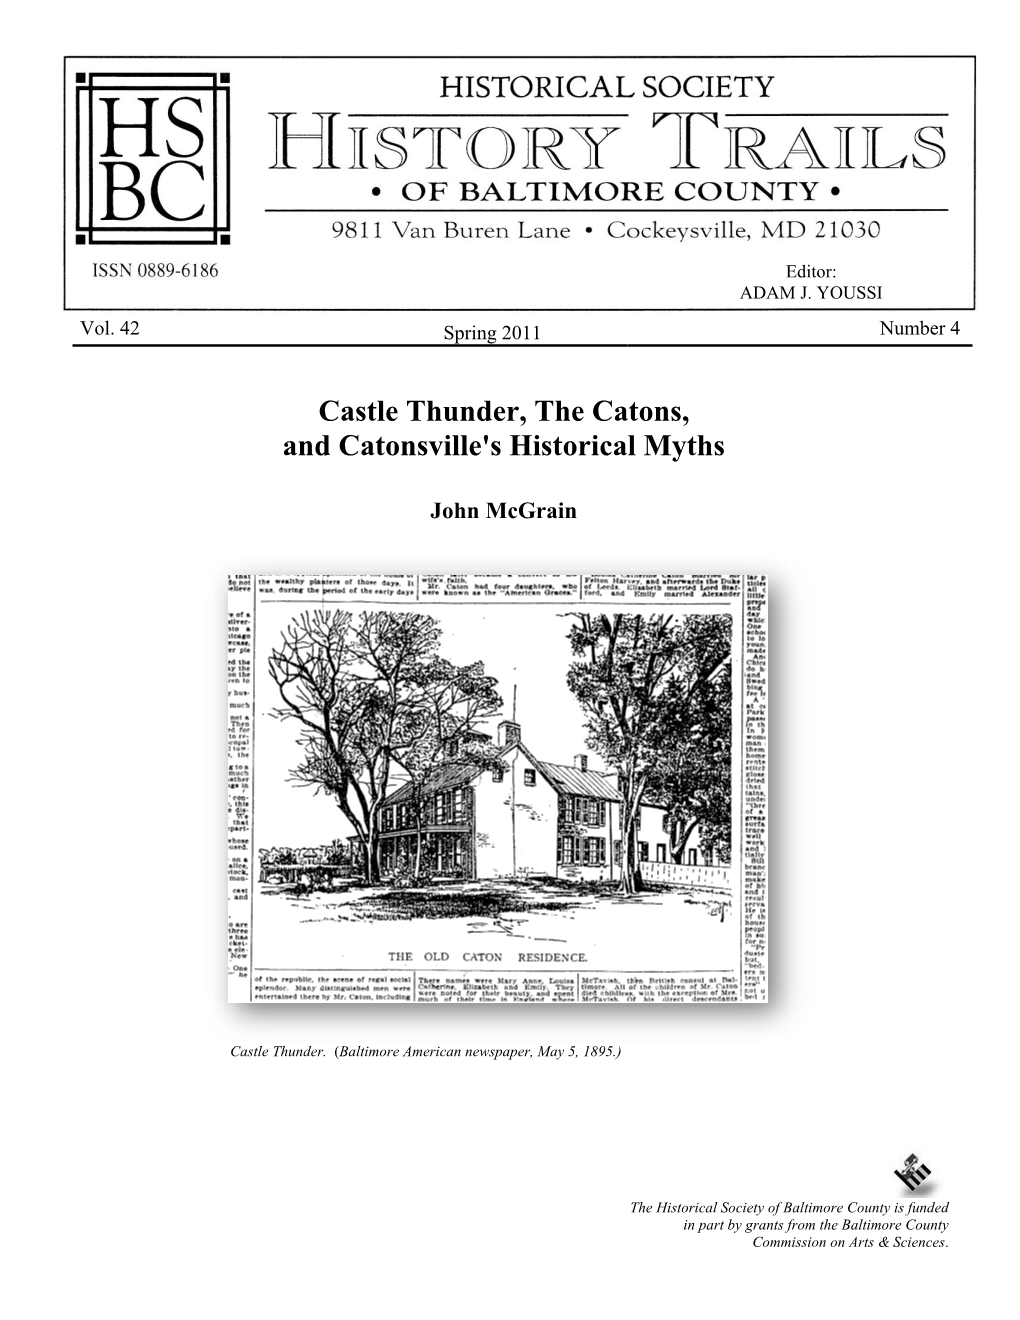 Castle Thunder, the Catons, and Catonsville's Historical Myths